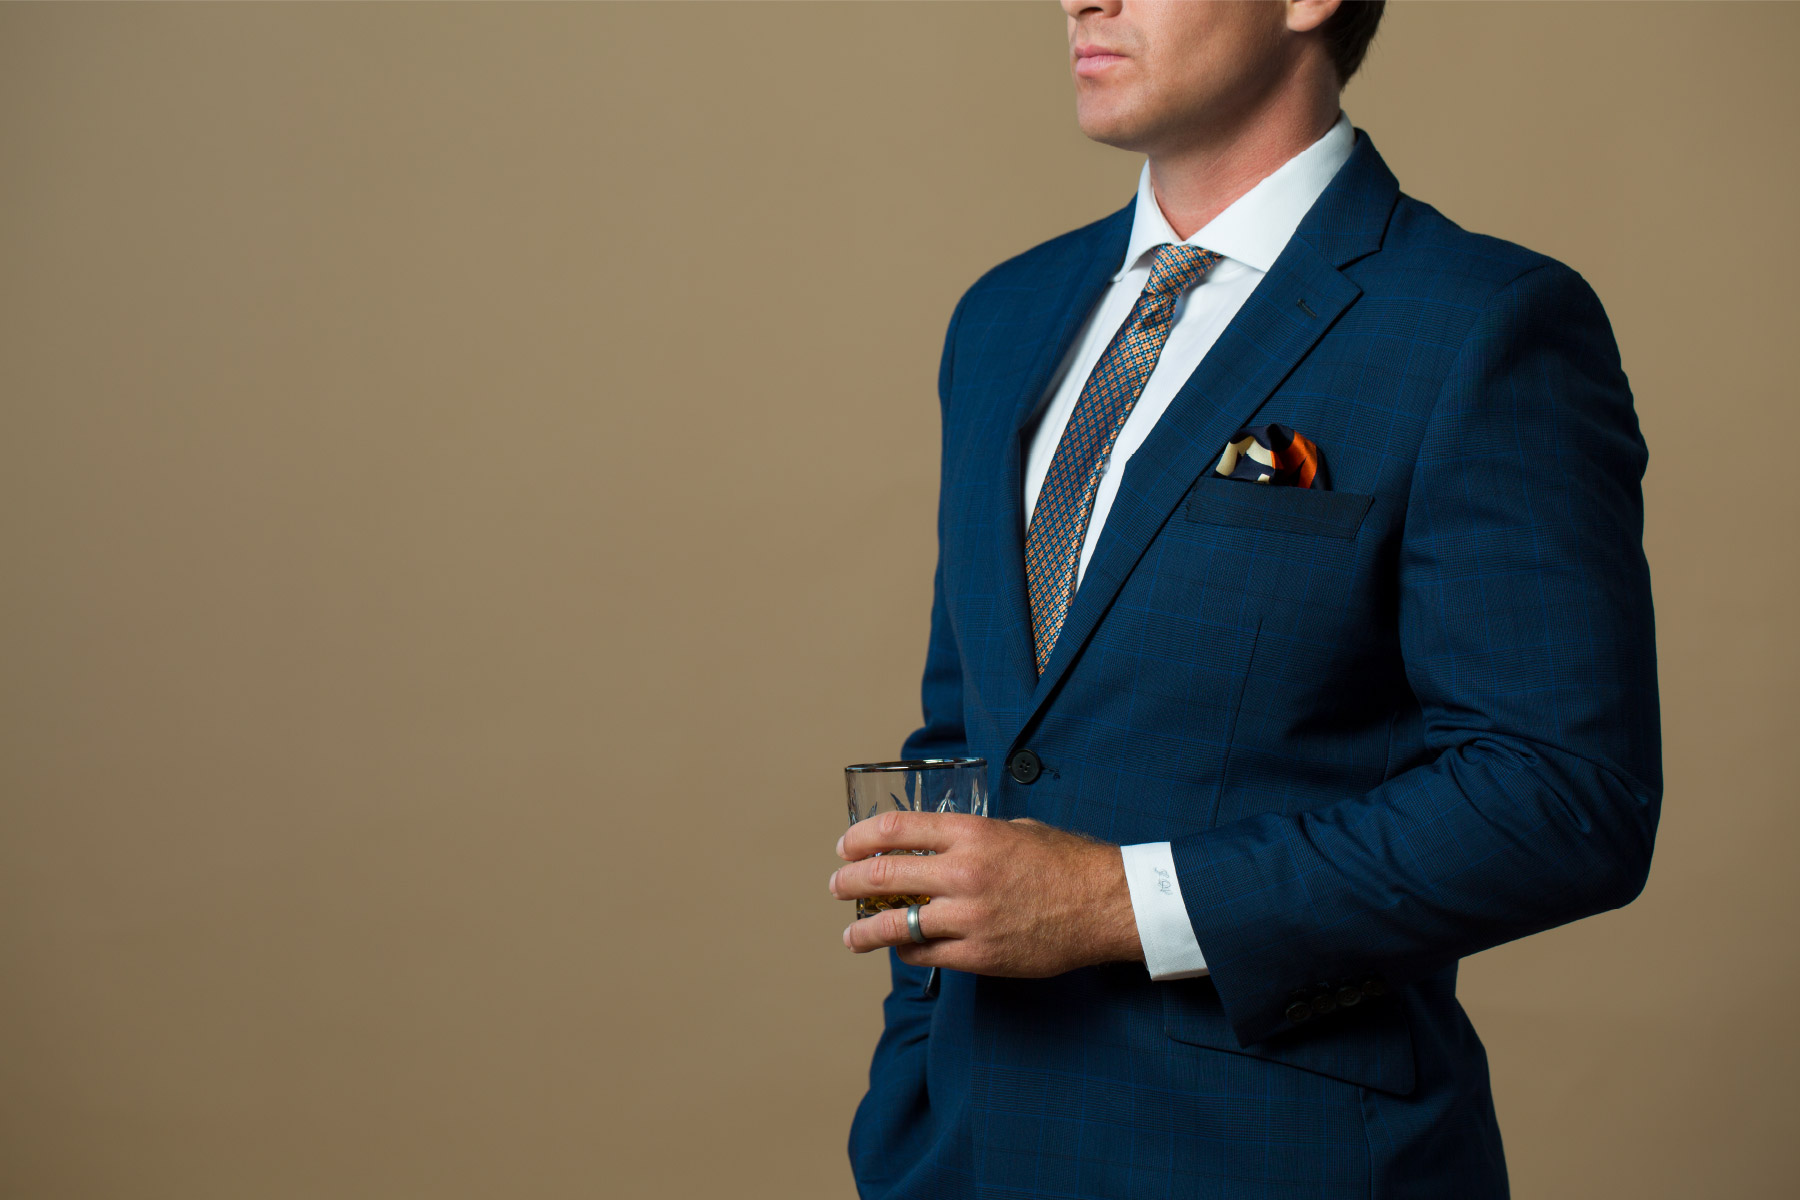 Fuze-Branding-High-Quality-Lifestyle-Product-Photography-Evolution-Of-Style-Client-Drinking-Custom-Navy-Textured-Suit